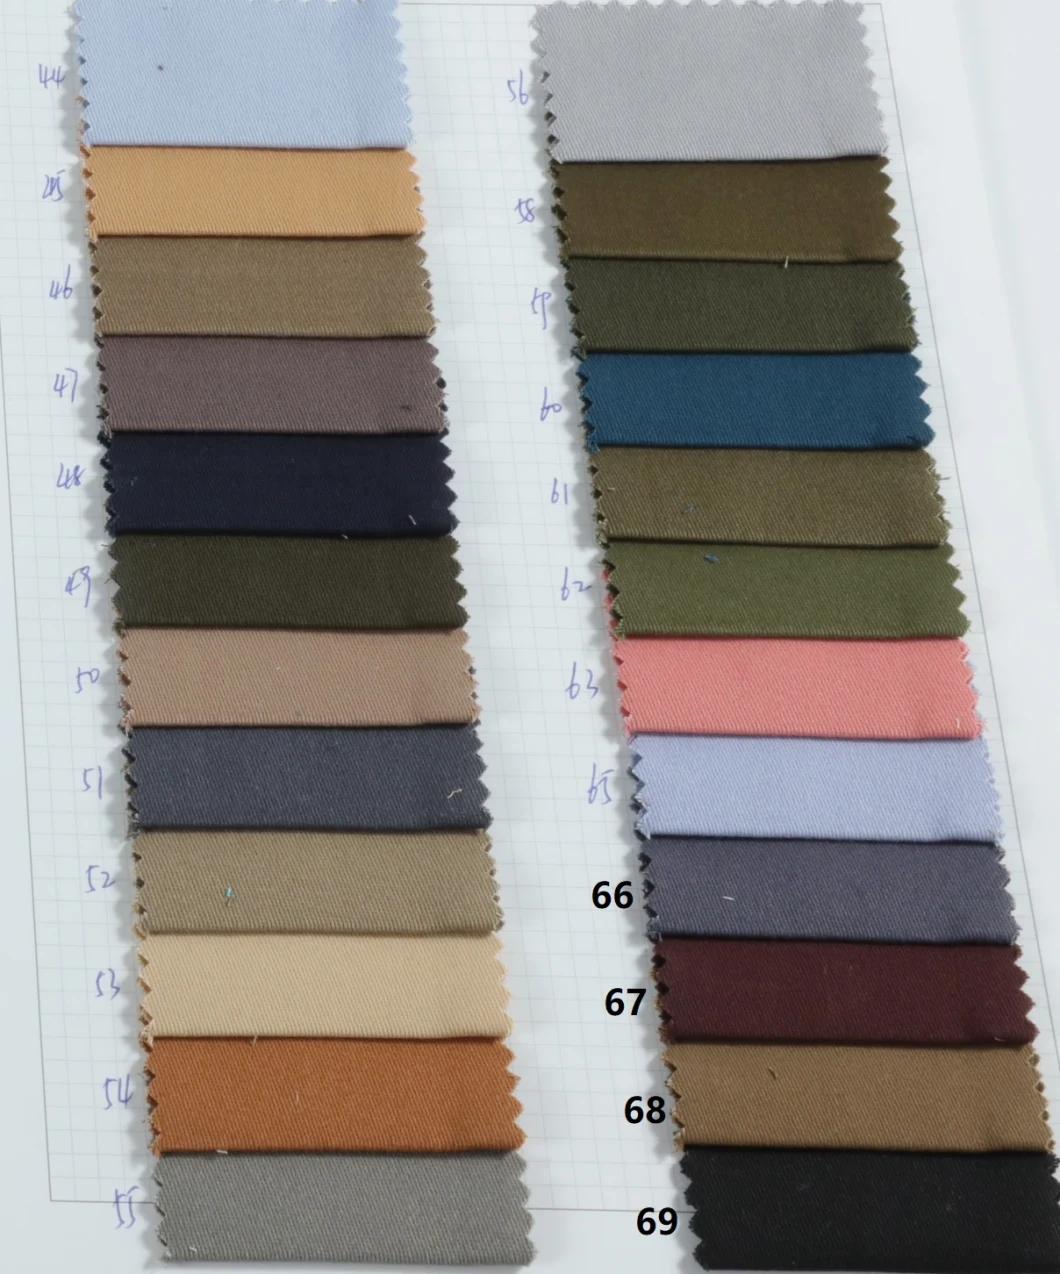 Fashion Stock 100 Cotton Woven Carbon Peach Twill Spandex Design Dyed Fabric for Garment Fabric